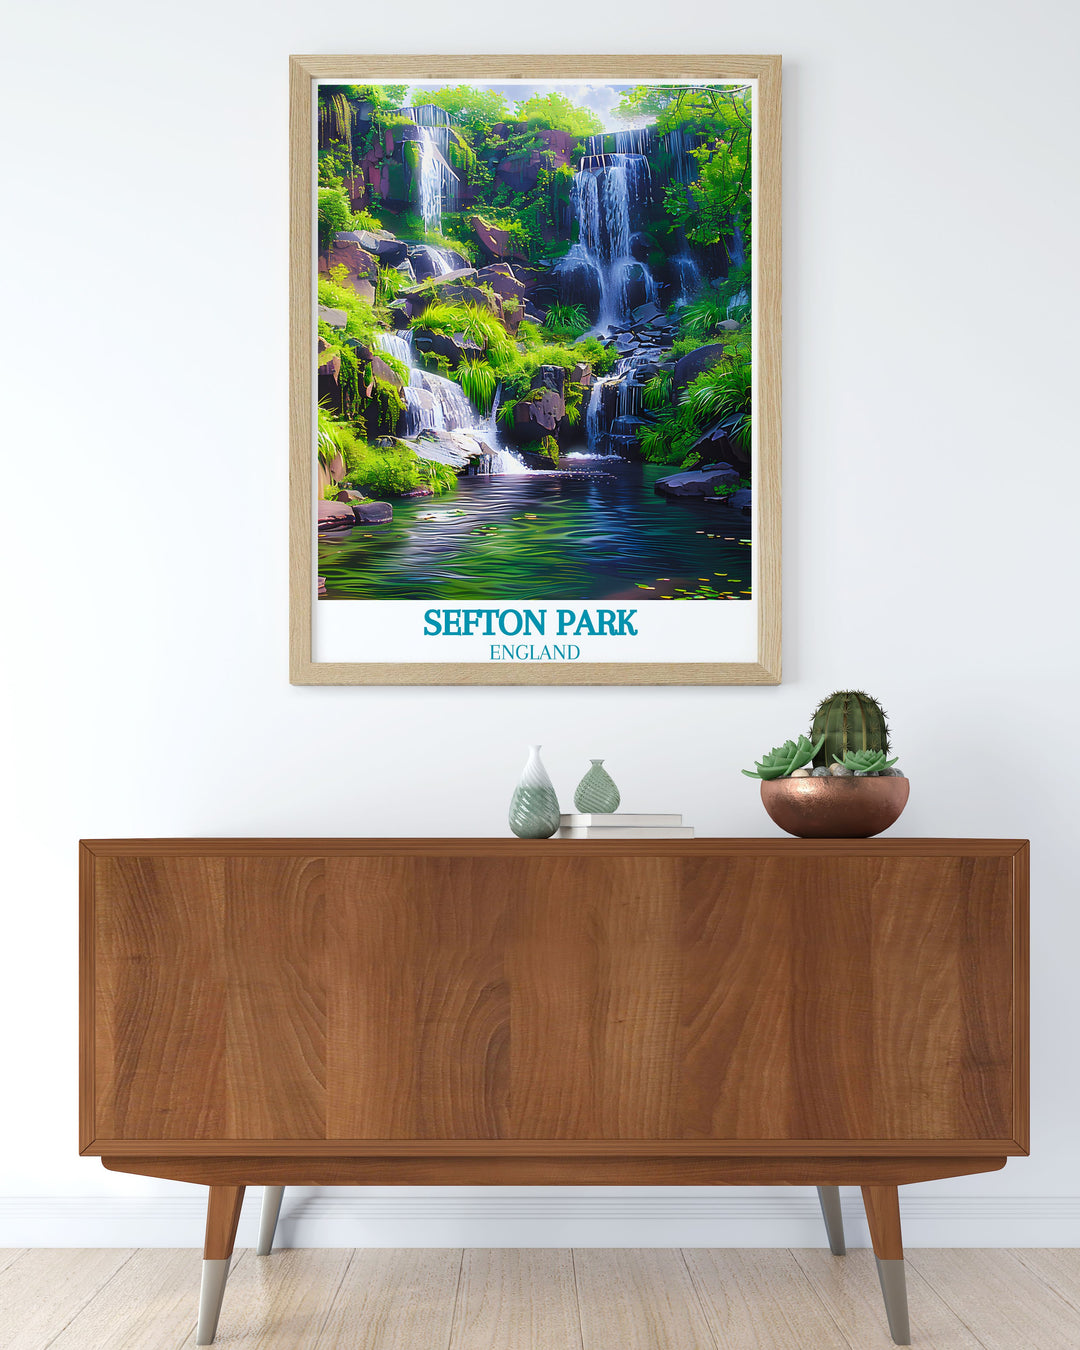 Stunning wall art print gift featuring Liverpools Sefton Palm House and the whimsical Fairy Glen. This piece combines the elegance of historical architecture with the enchanting allure of nature making it a unique addition to your decor.